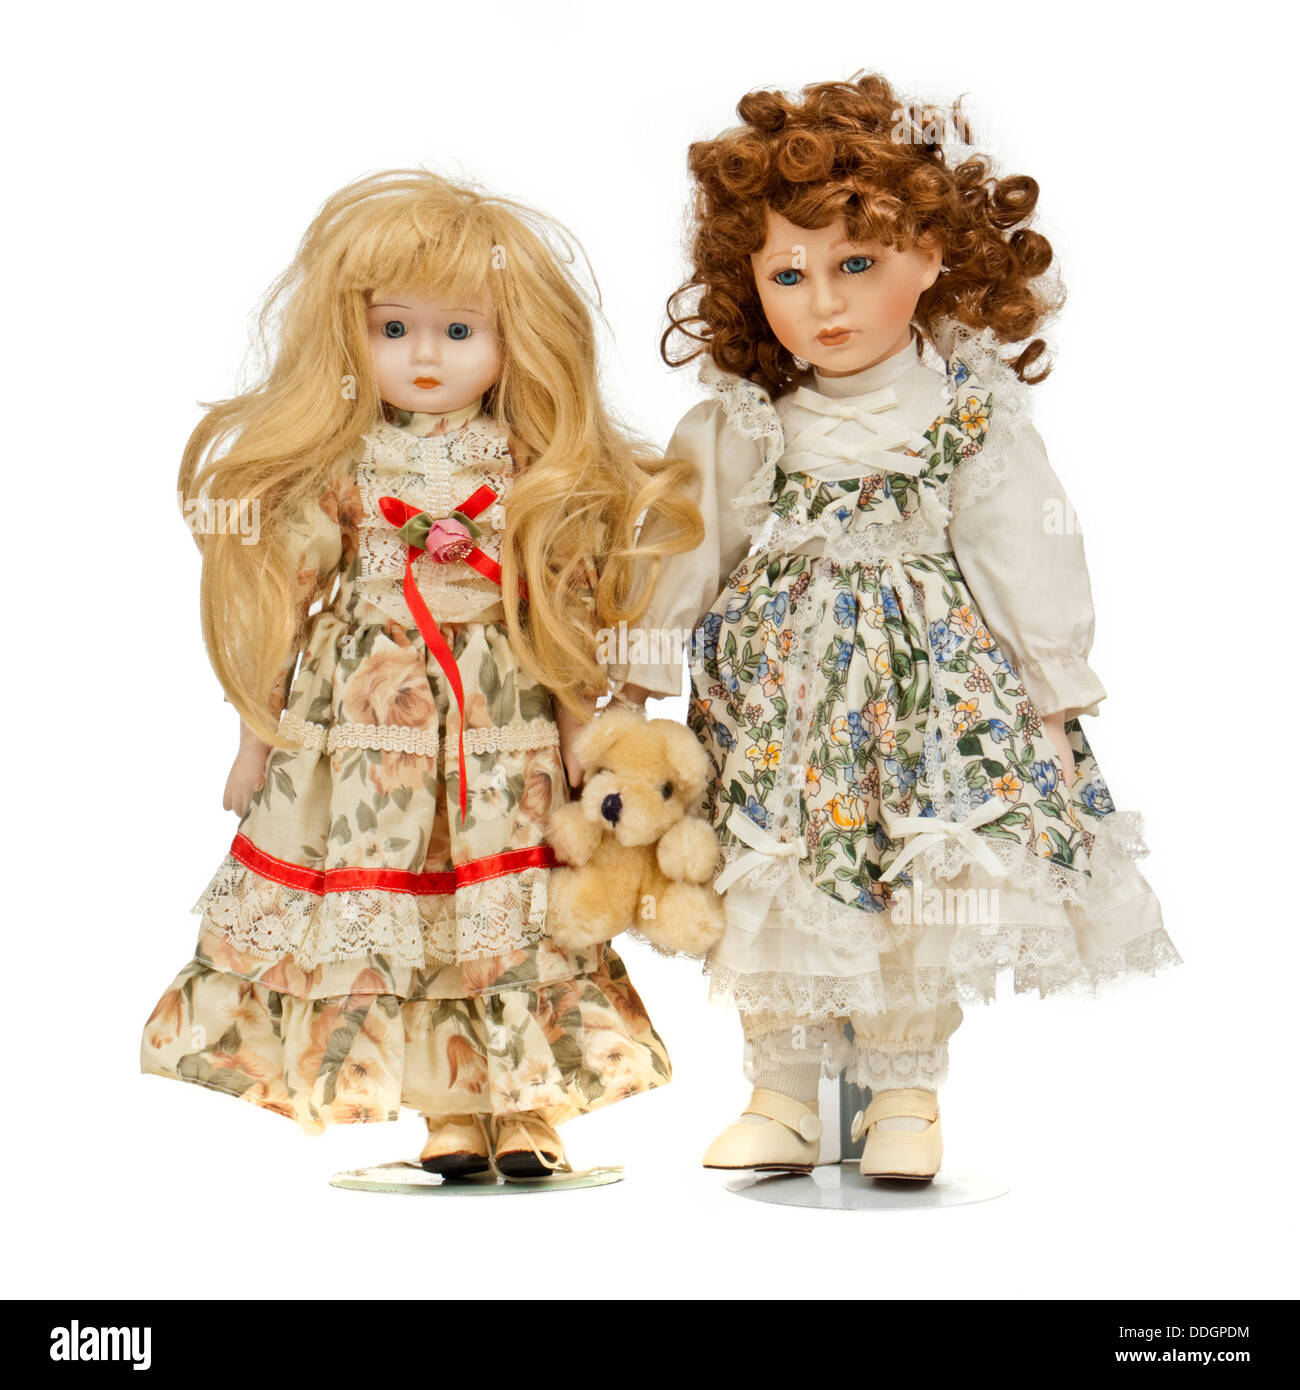 Pair of collectable porcelain dolls Stock Photo